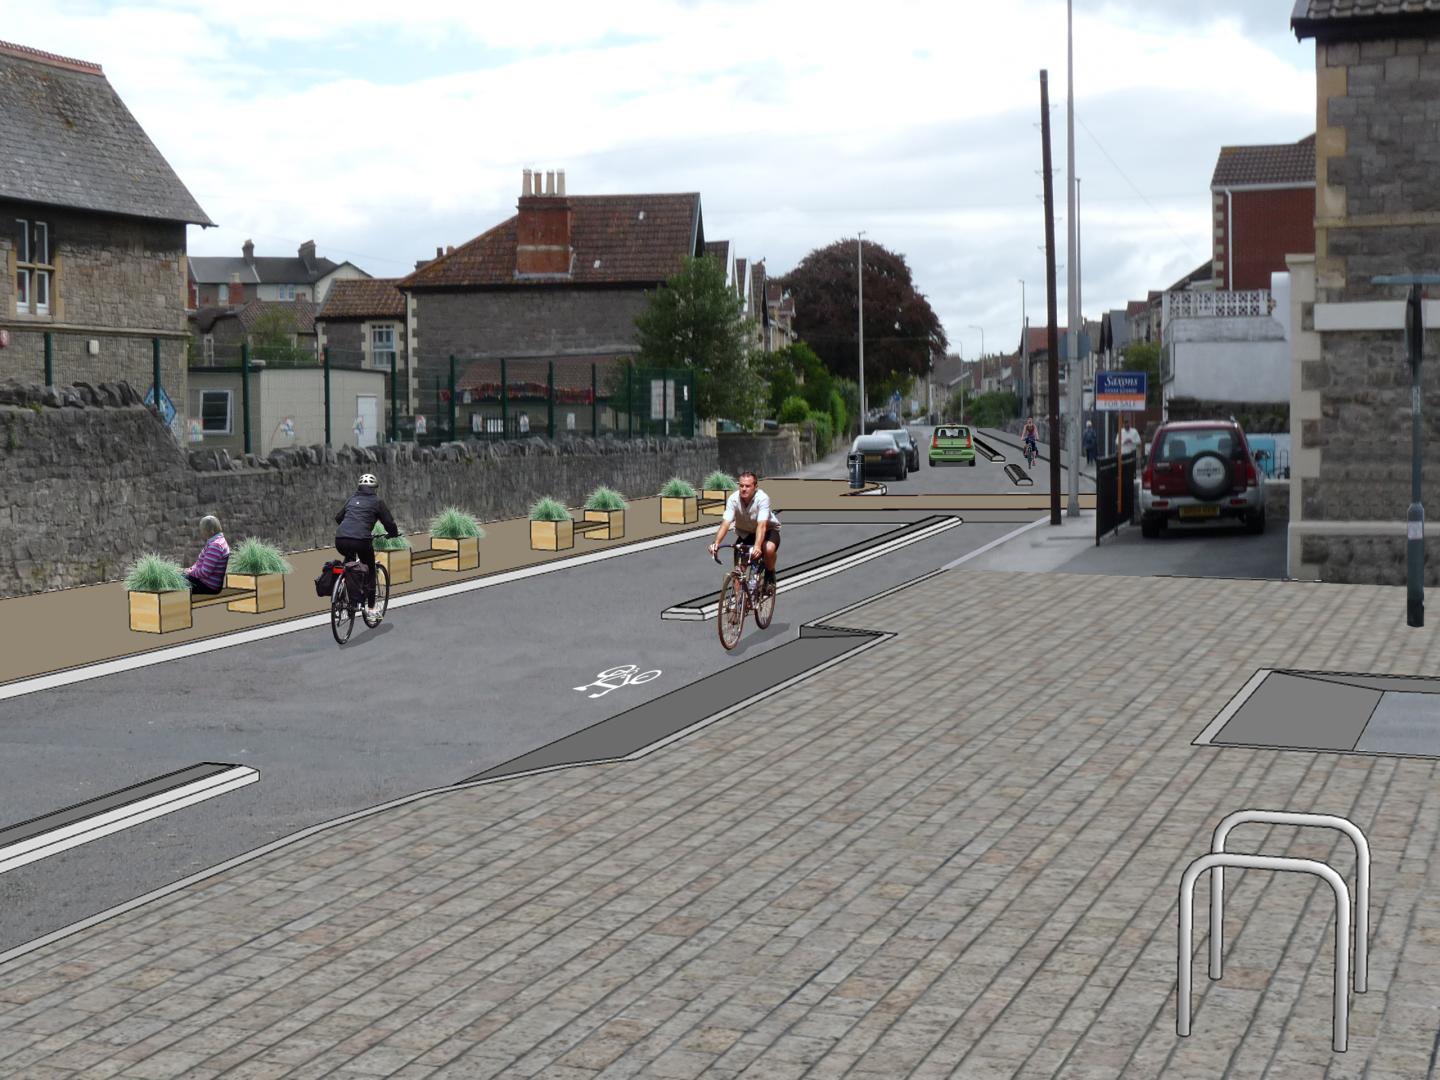 People cycling on the road outside Baker Street school with the proposed changes